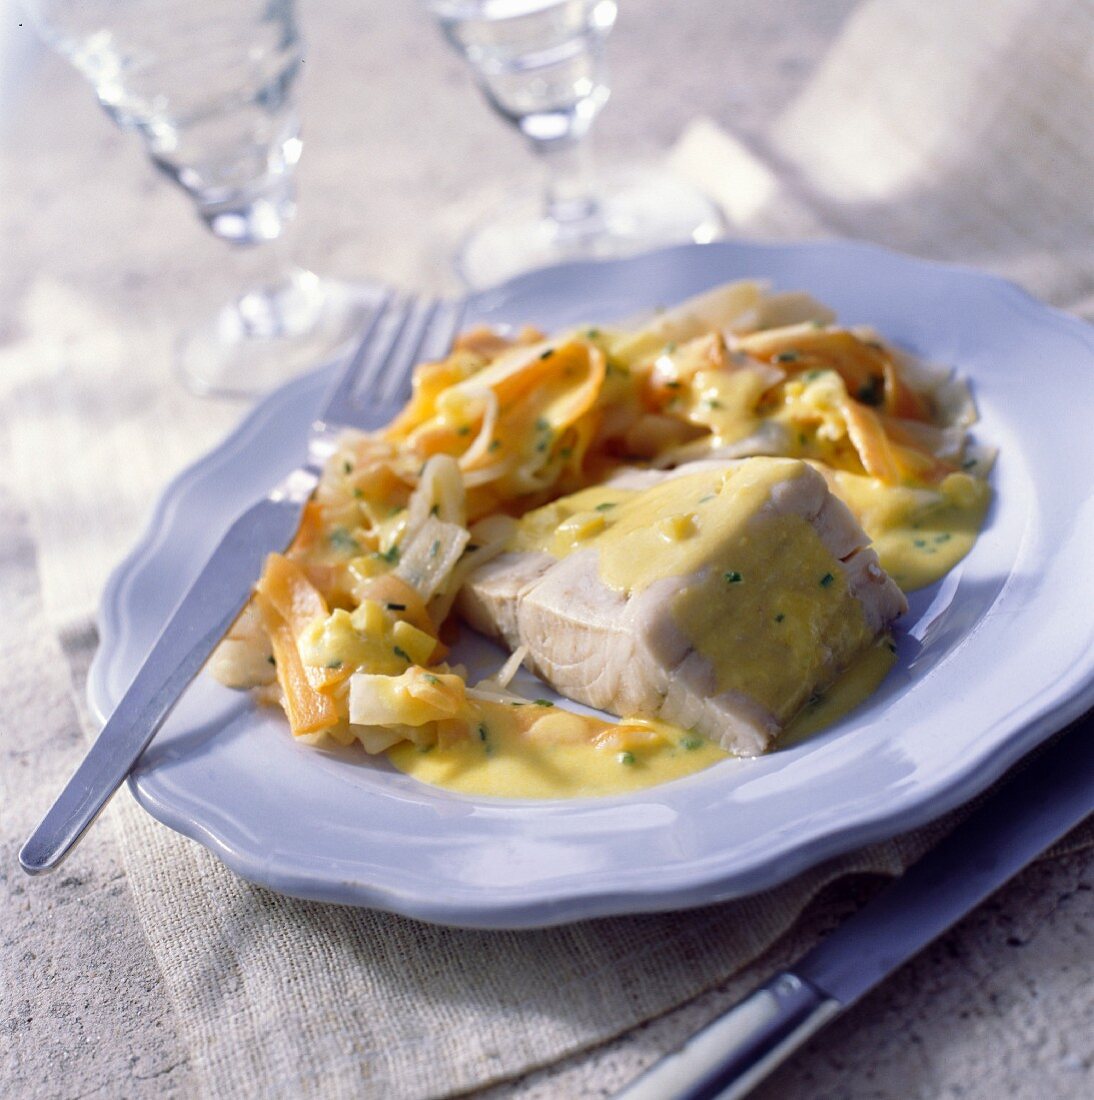 Hake fillet in saffron-flavored sauce with mess of vegetables